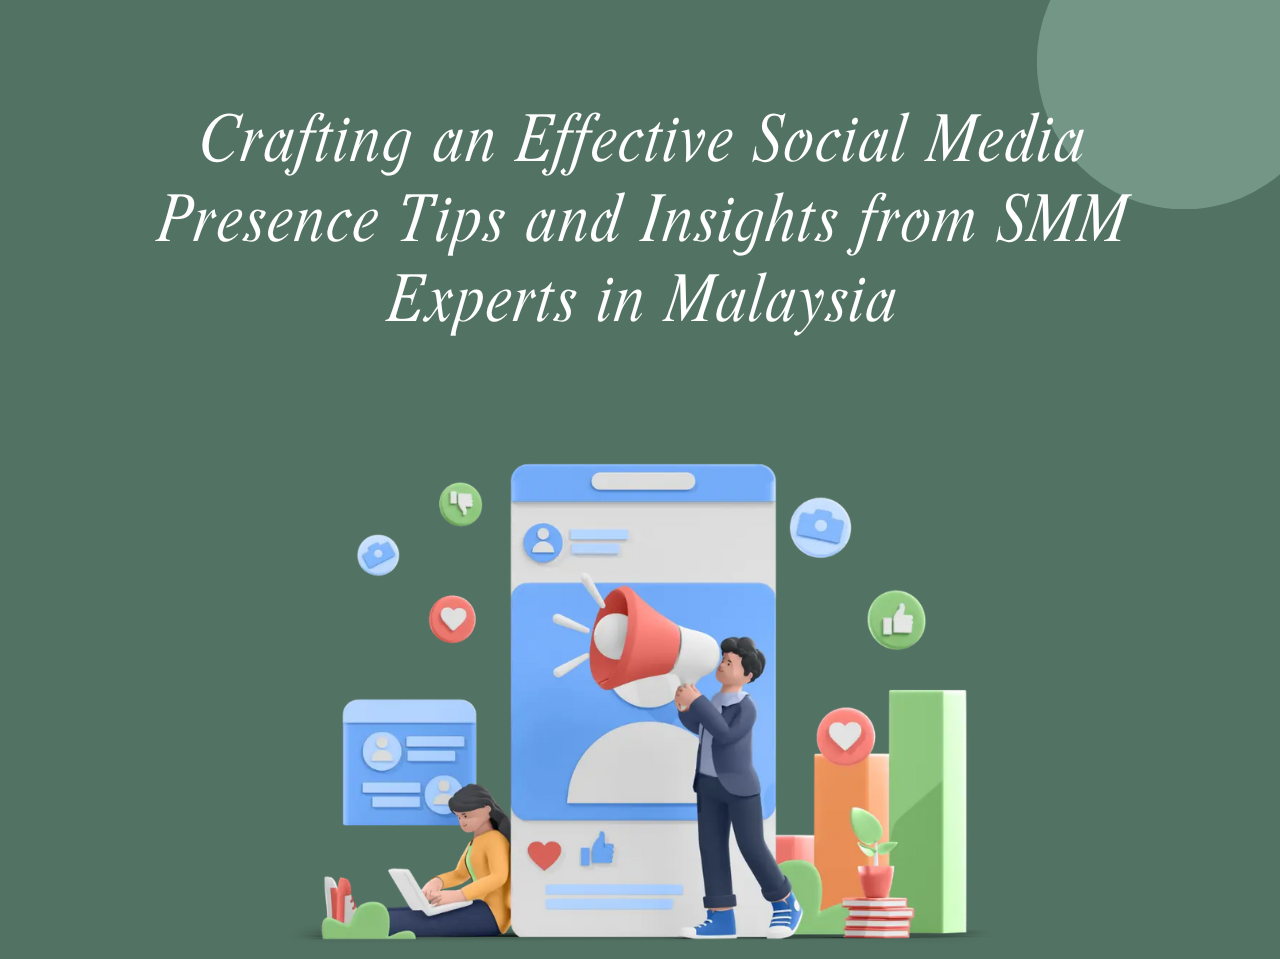 SMM services in Malaysia